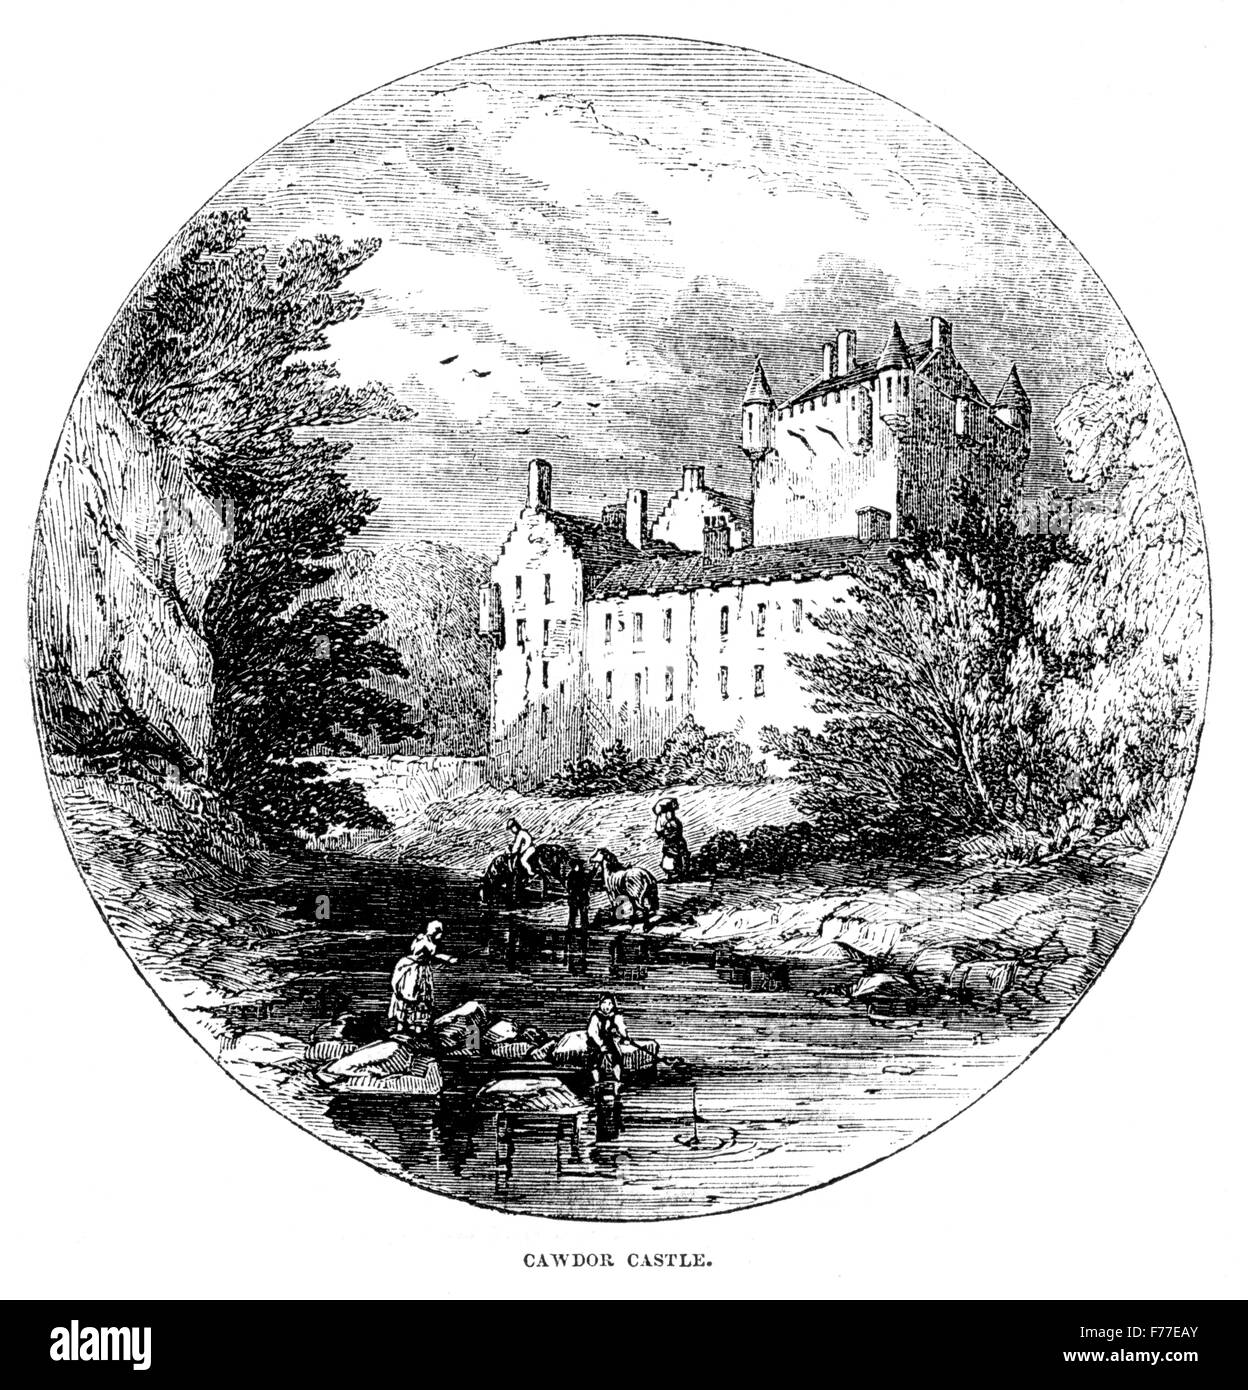 An engraving of a Cawdor Castle scanned at high resolution from a book printed in 1852. Believed to be free of all copyright. Stock Photo